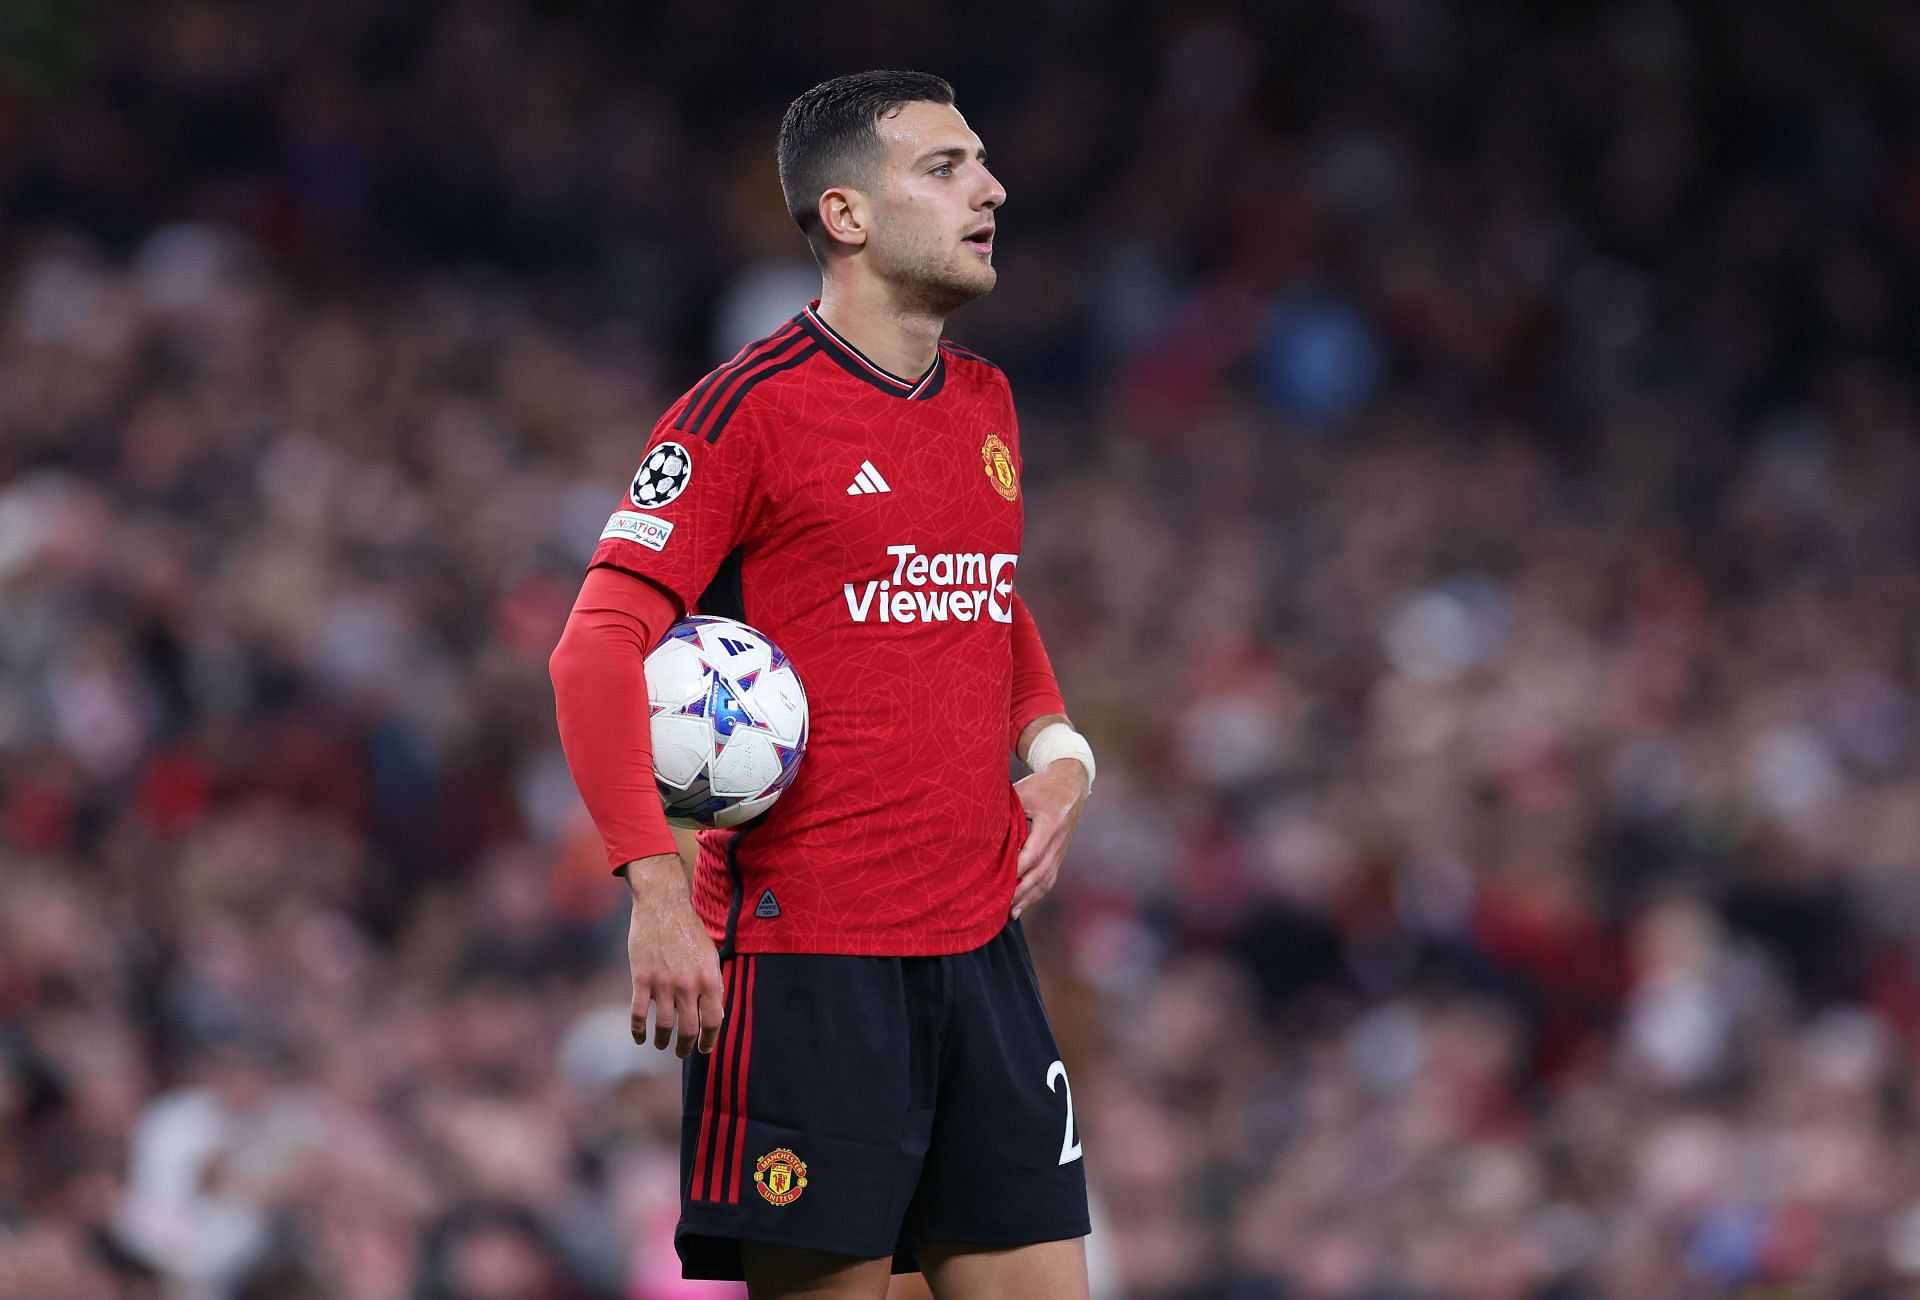 Dalot has been playing as a makeshift left-back due to injuries.